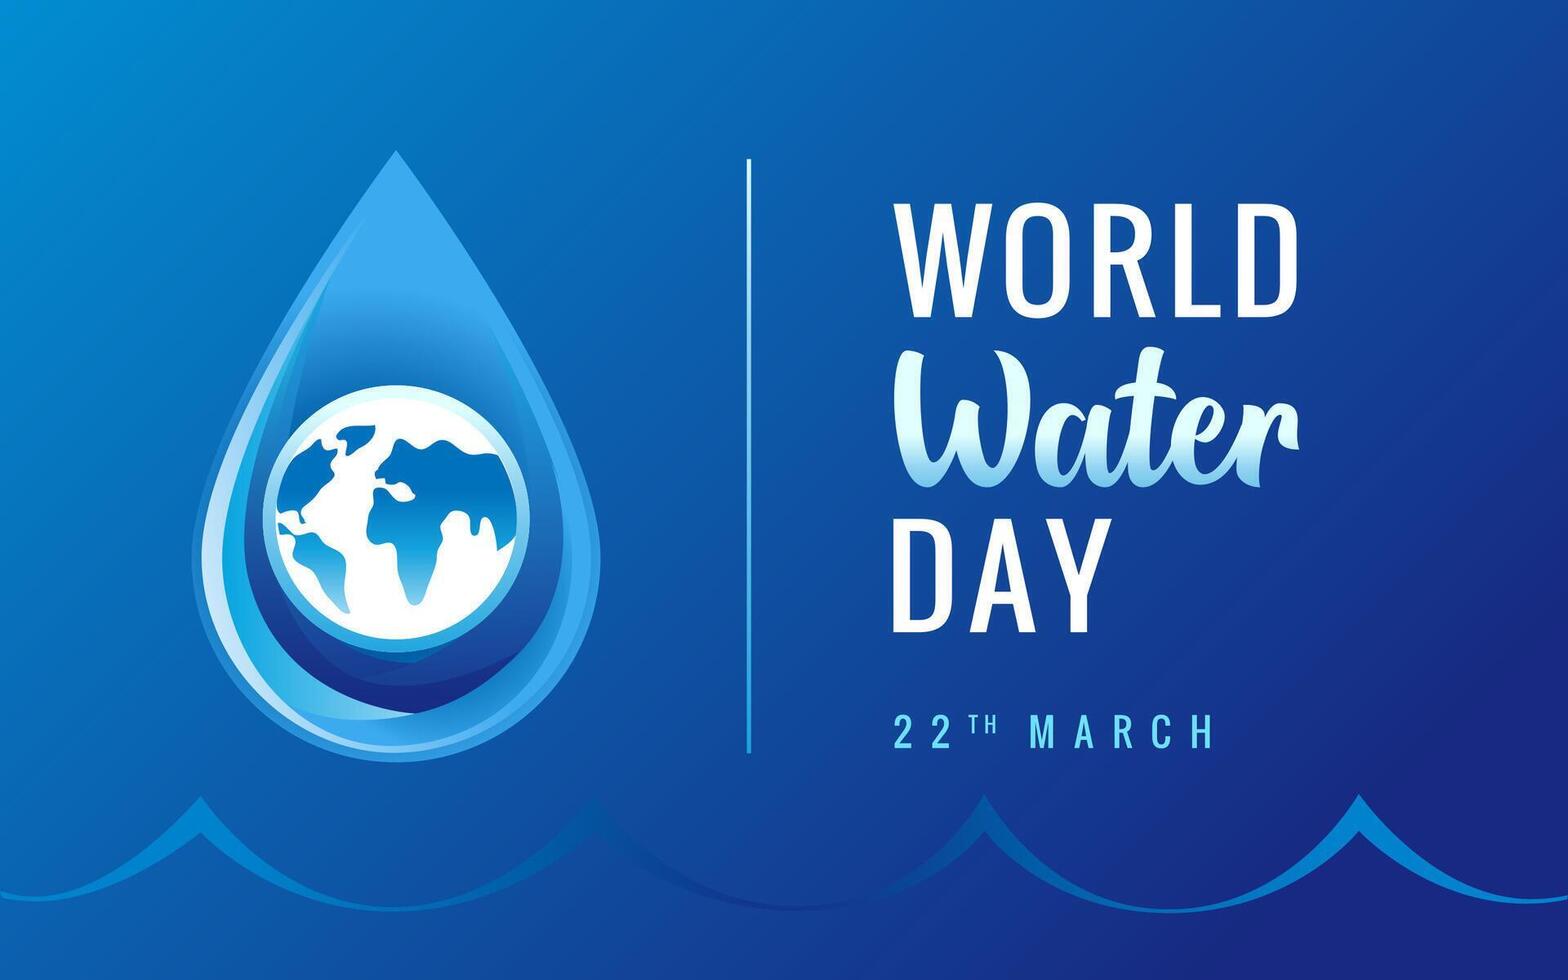 World water day poster design vector